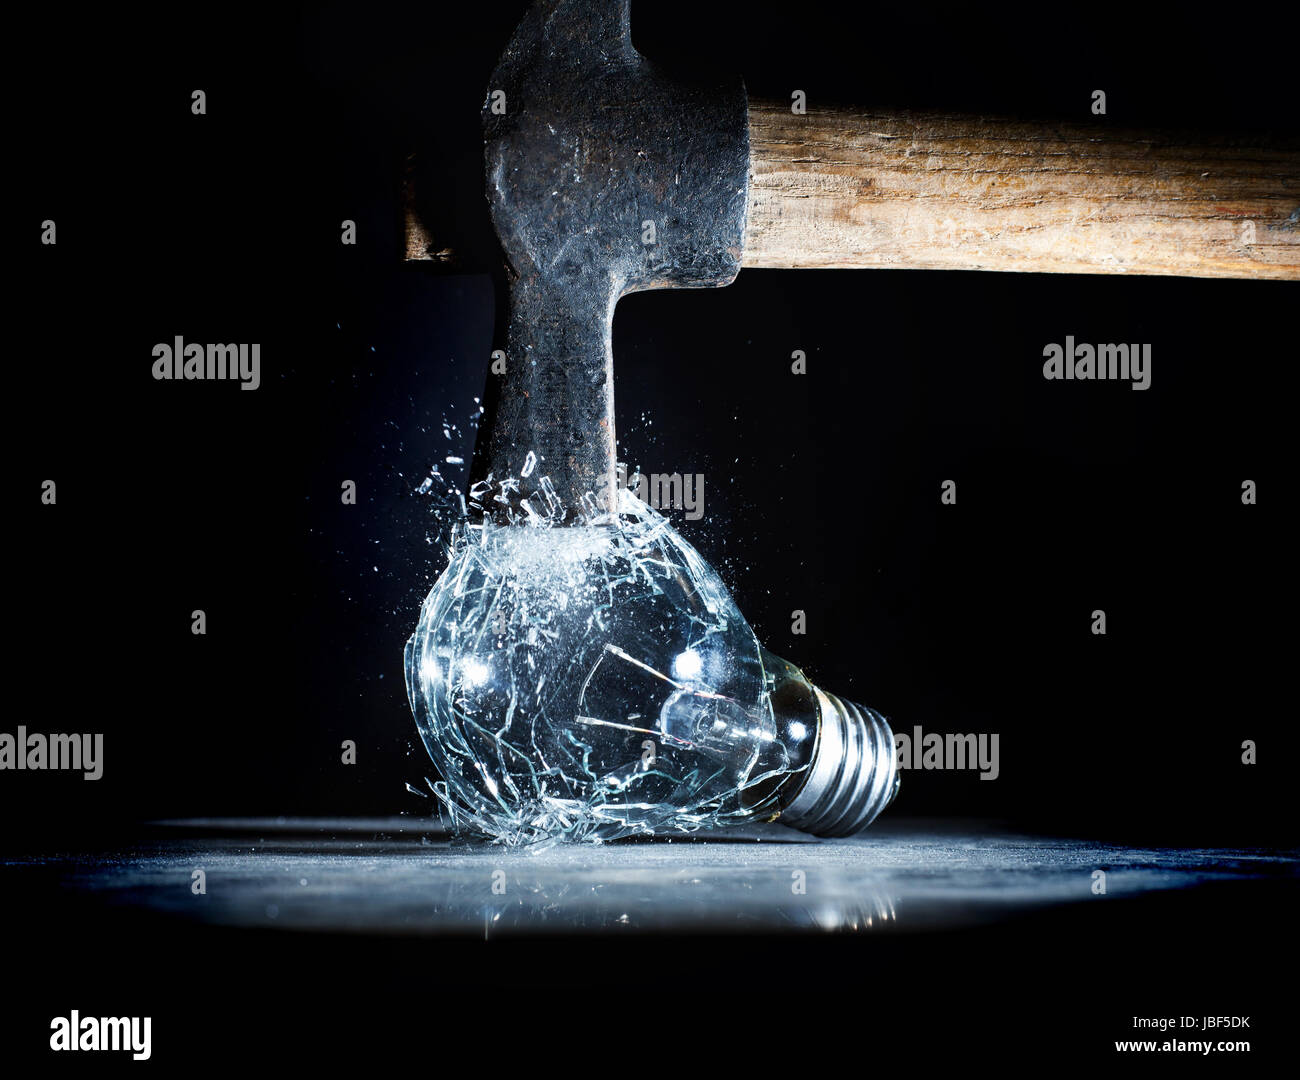 hammer tool destroy electric bulb high speed photo Stock Photo